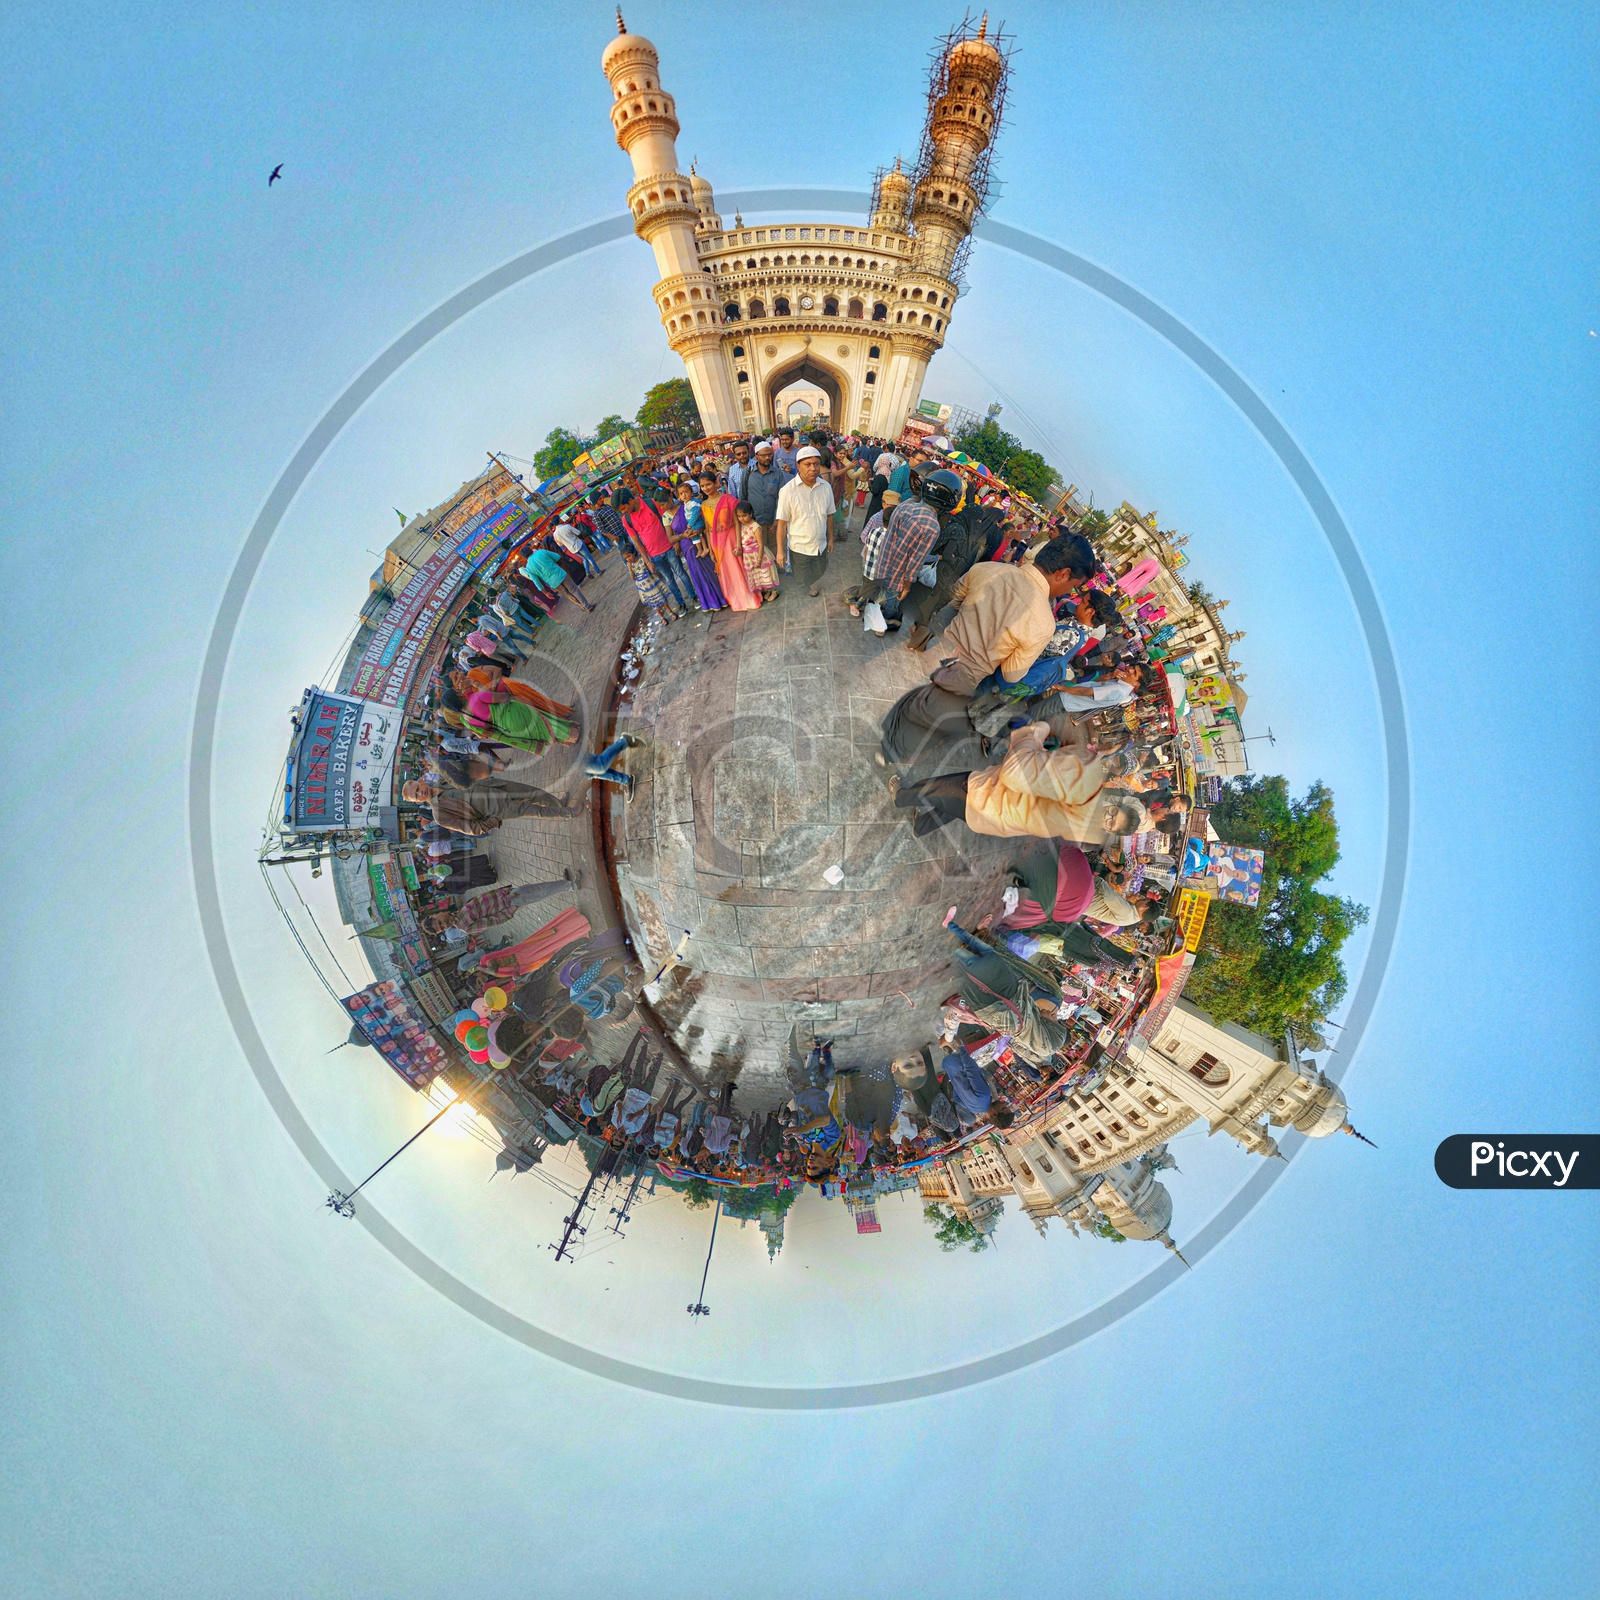 Move around in the streets of Charminar